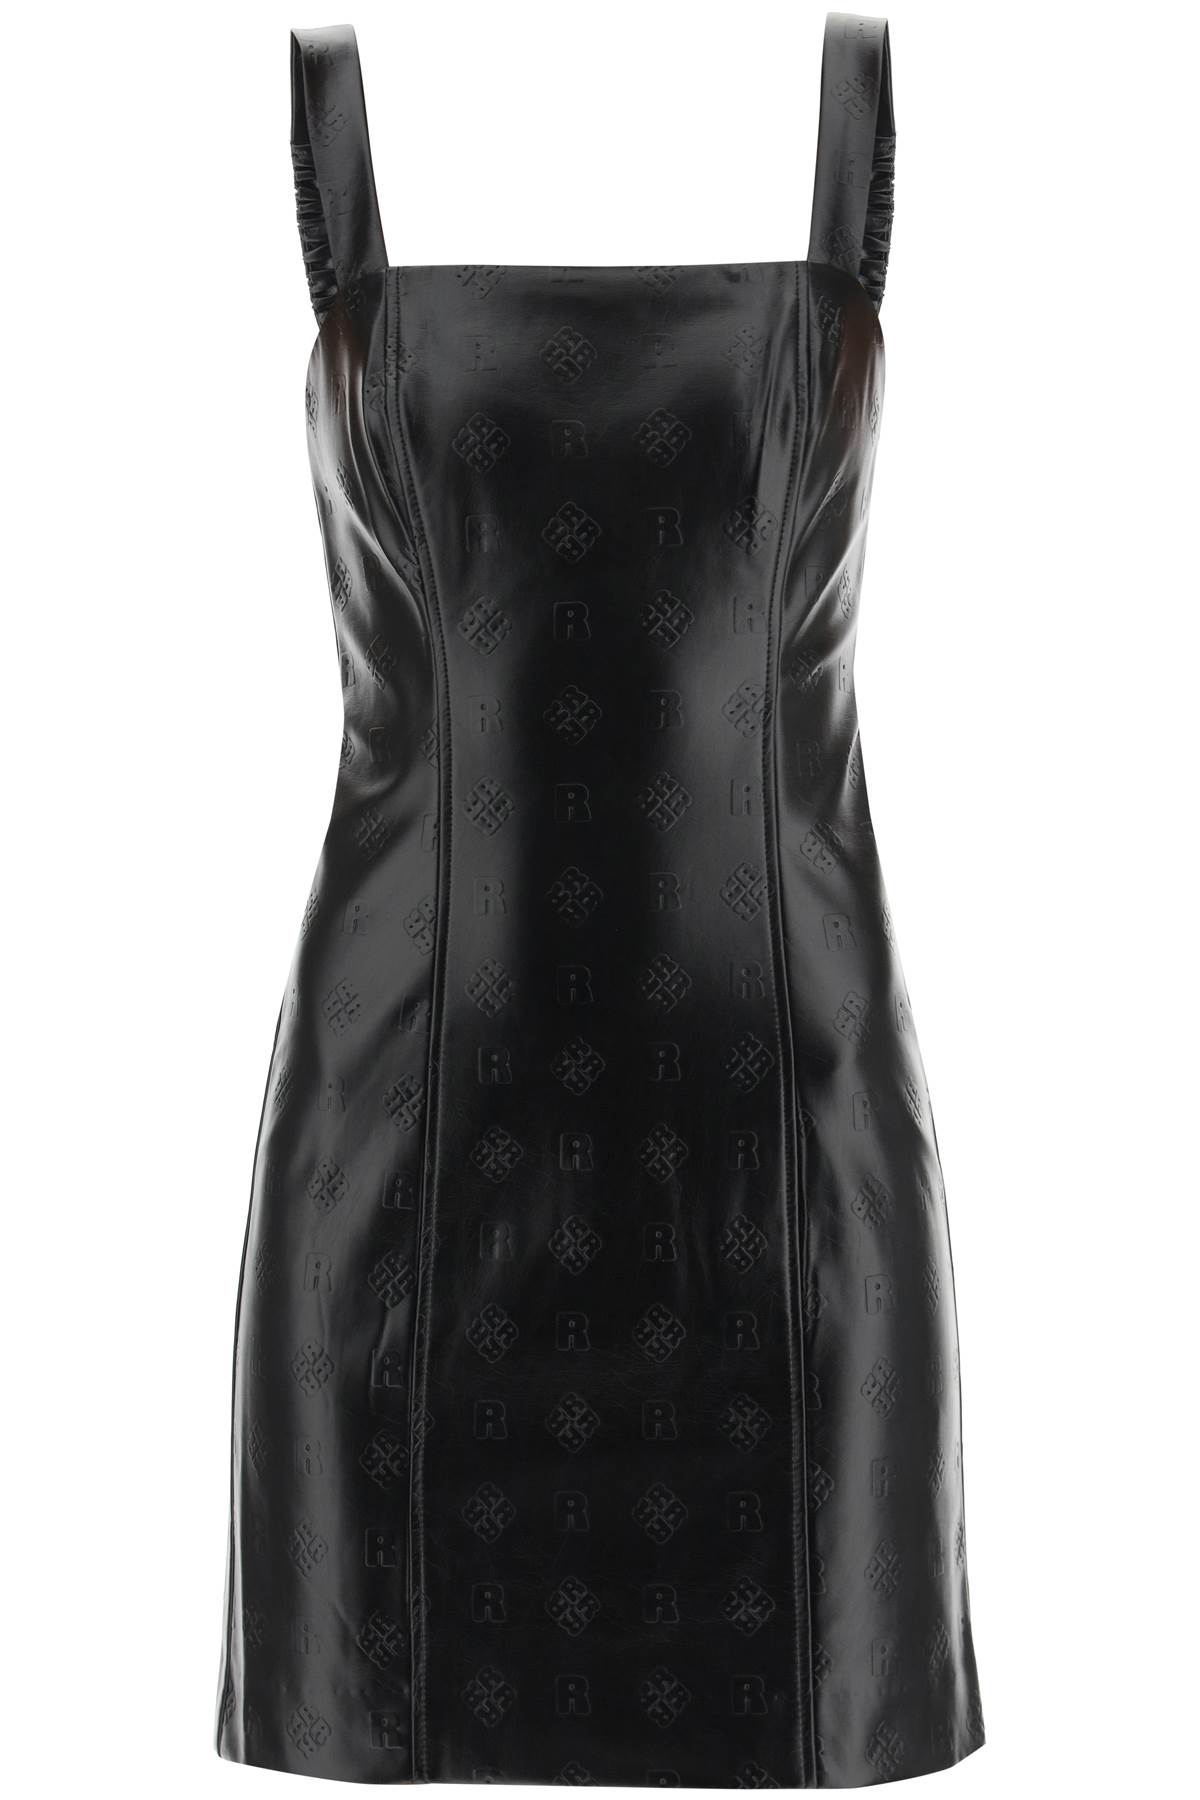 Rotate by Birger Christensen herlina Faux Leather Mini Dress